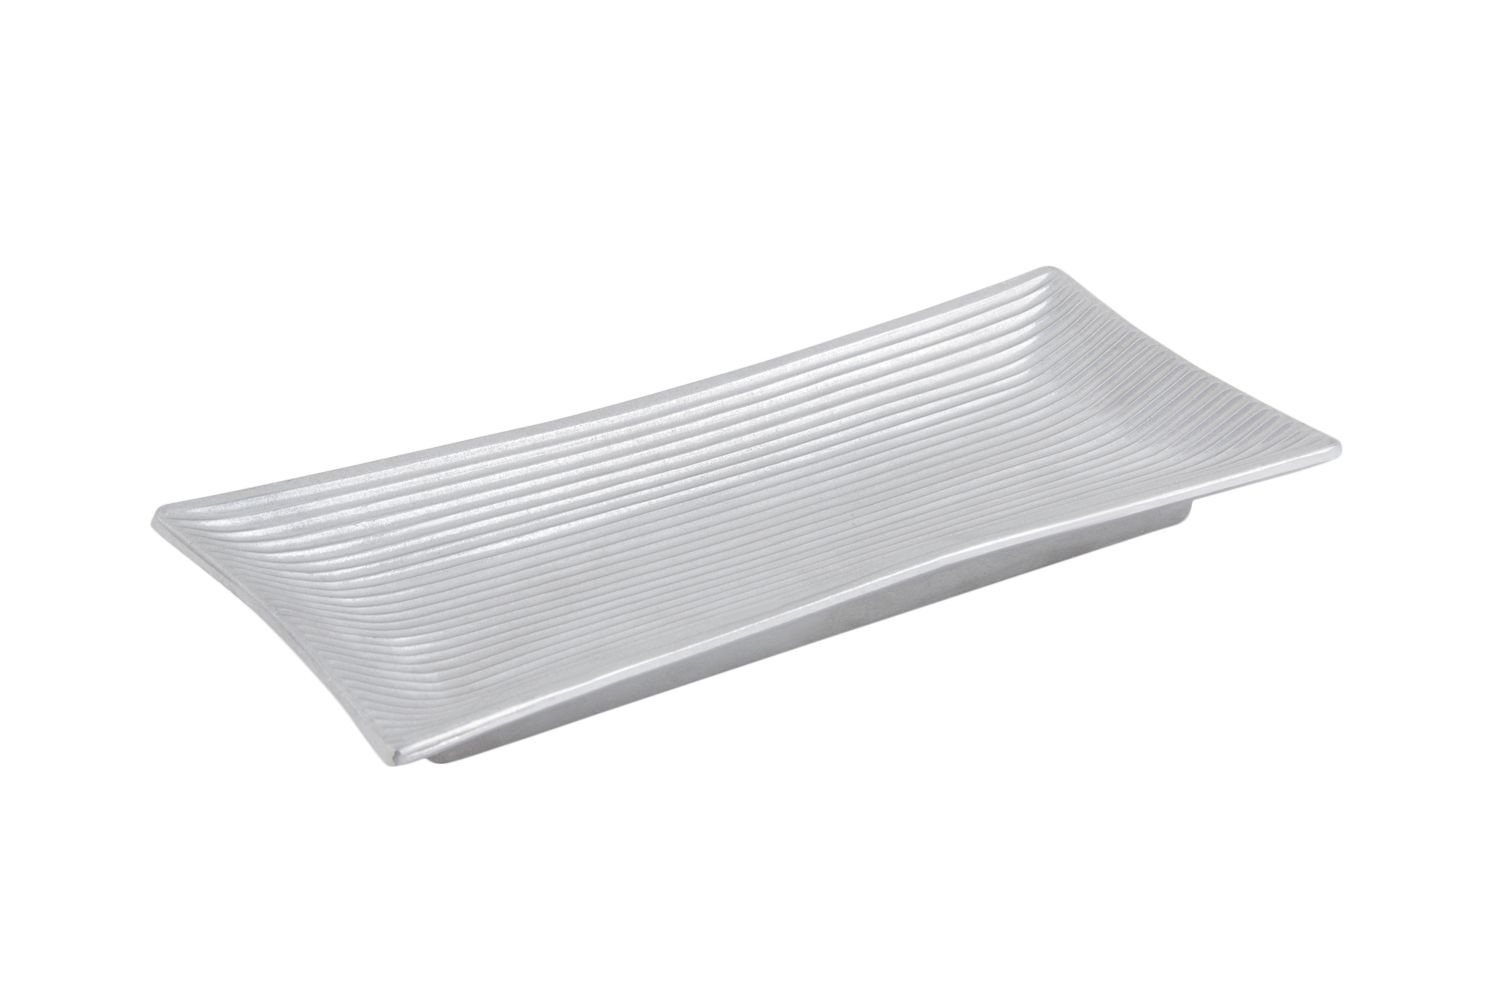 Bon Chef 9921P Footed Ribbed Rectangular Platter, Pewter Glo 6 1/2" x 14", Set of 6